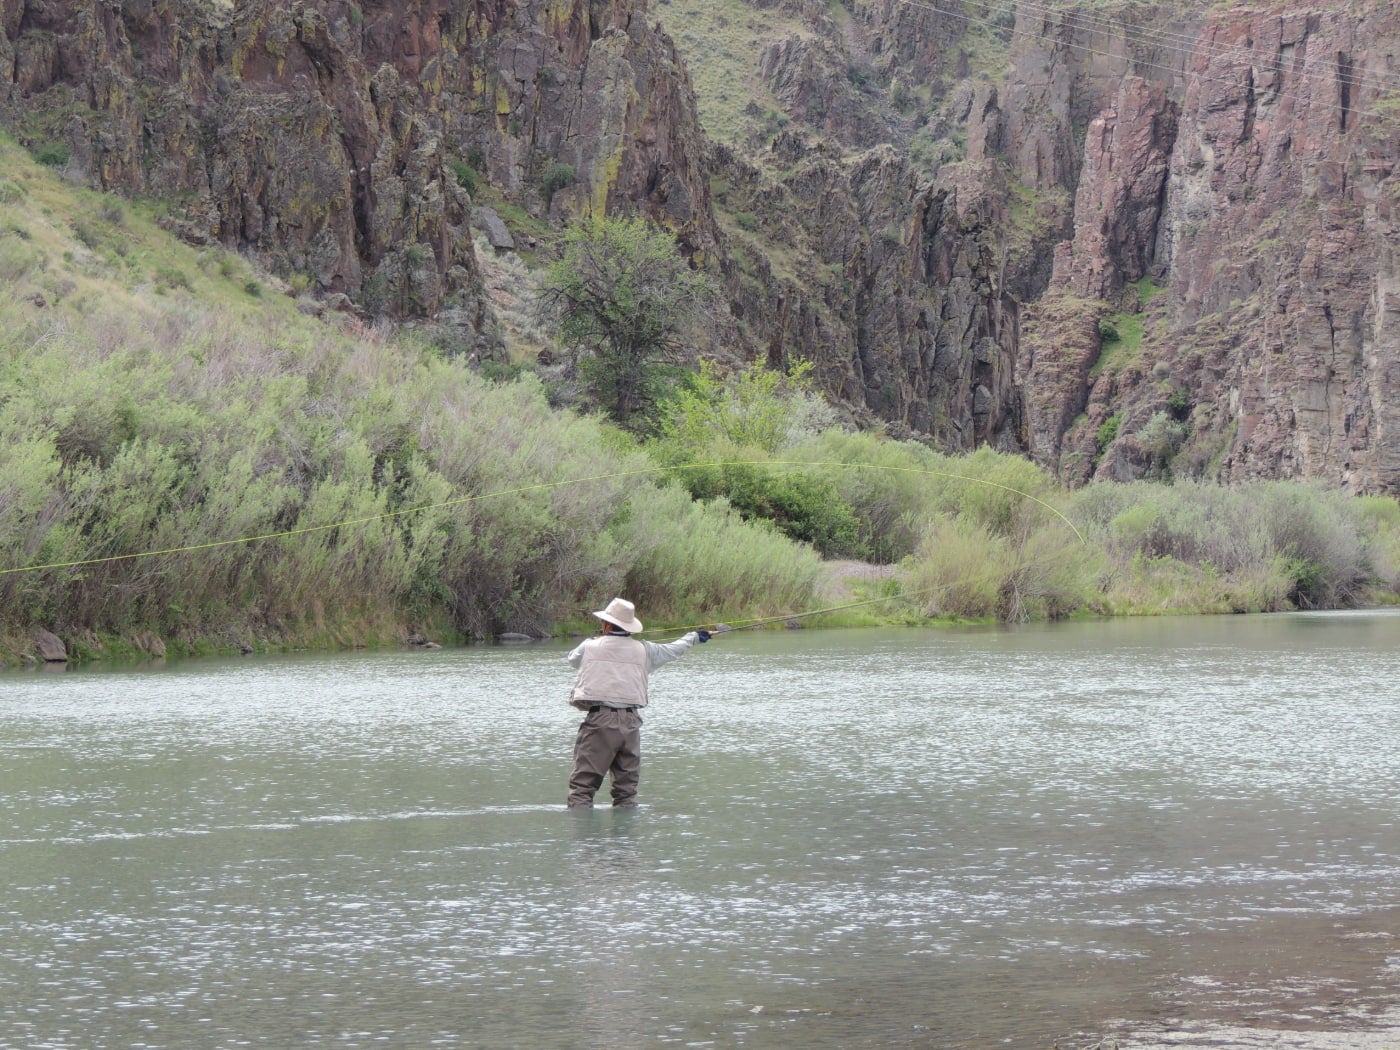 Man in a khaki hat and vest with green waders stands in a low river while fly fishing, behind him are green bushes and a large vertical rock face.